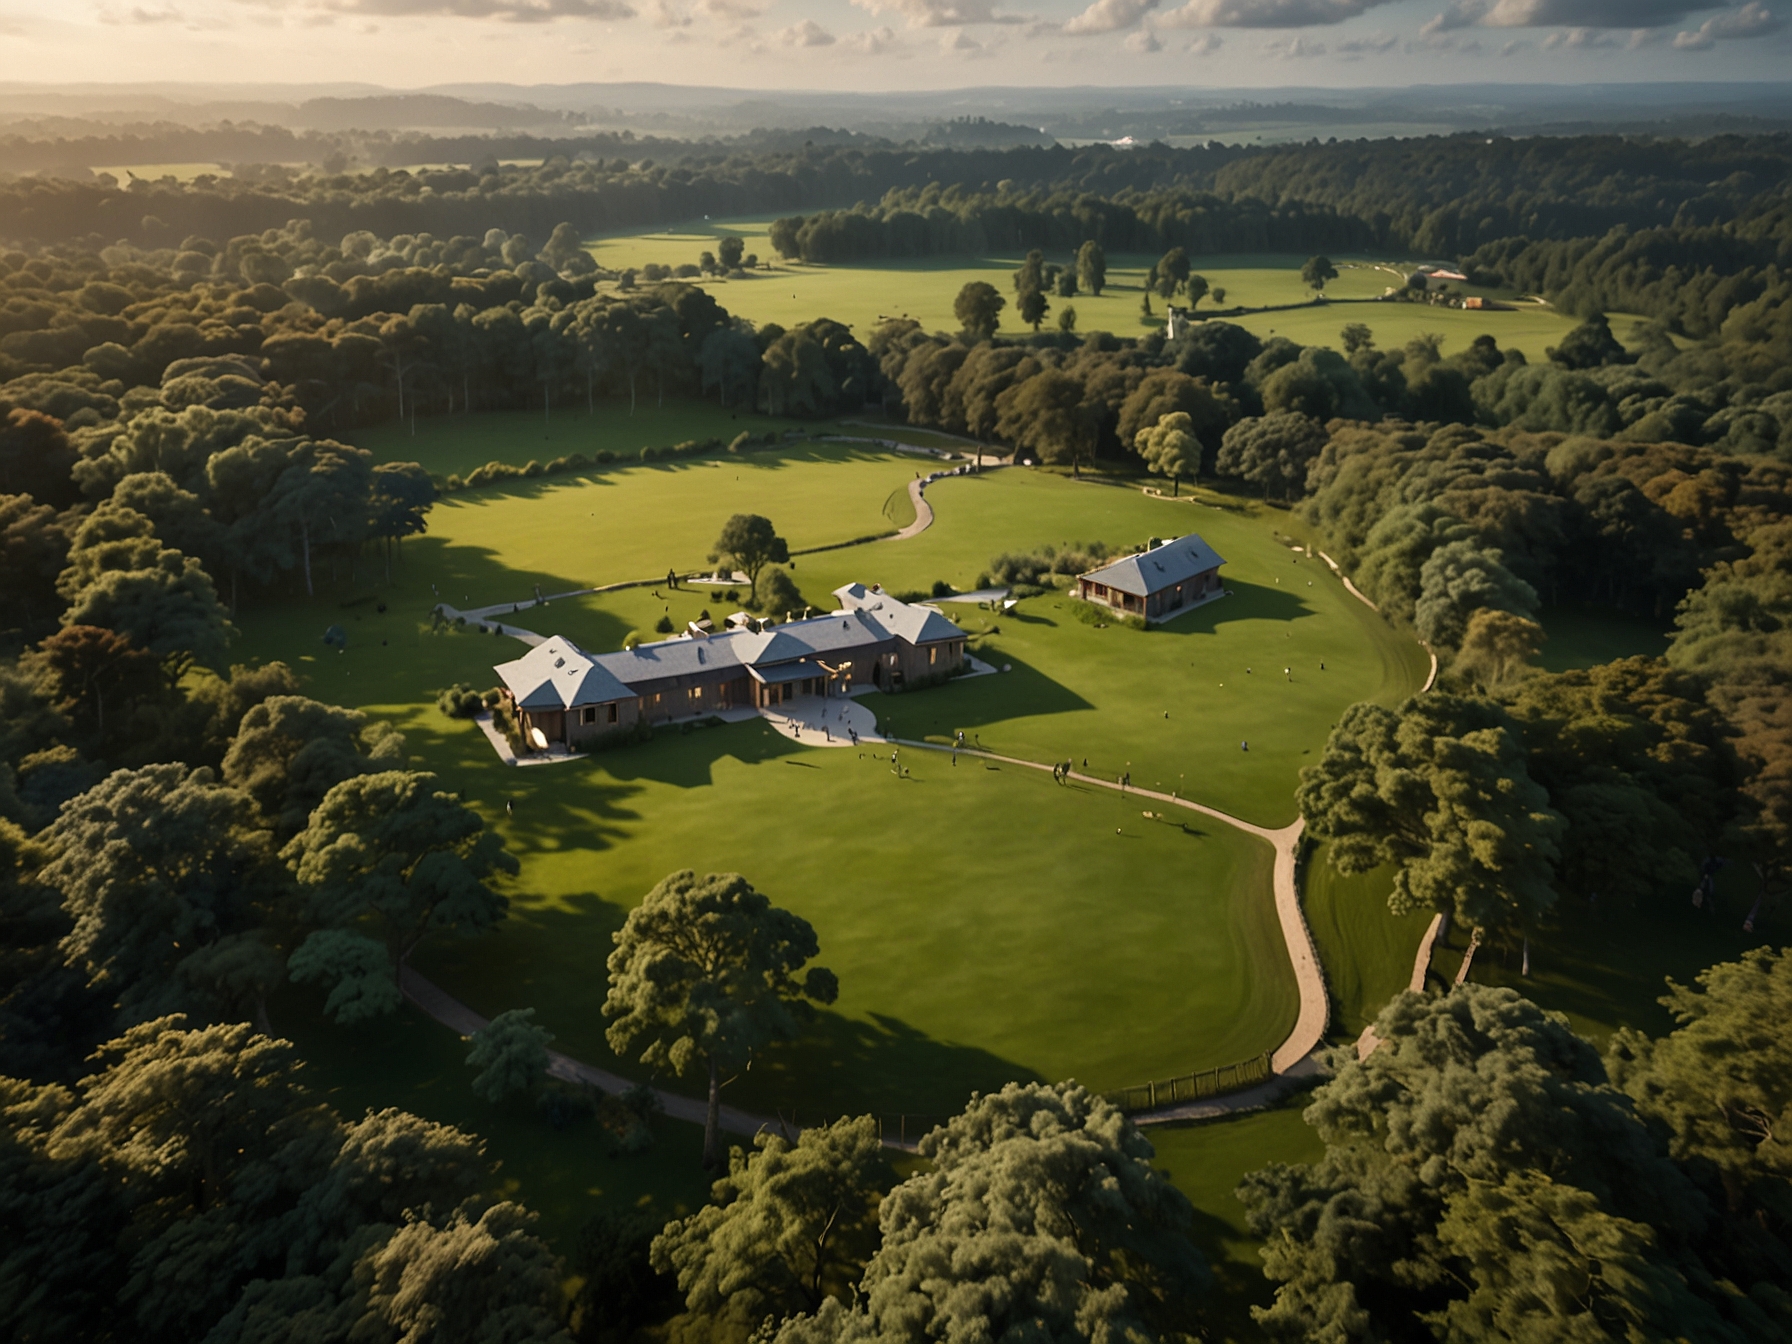 An aerial view of the serene UK deer park where new eco-friendly holiday lodges will be built, offering guests luxurious accommodations amidst lush greenery and wildlife.